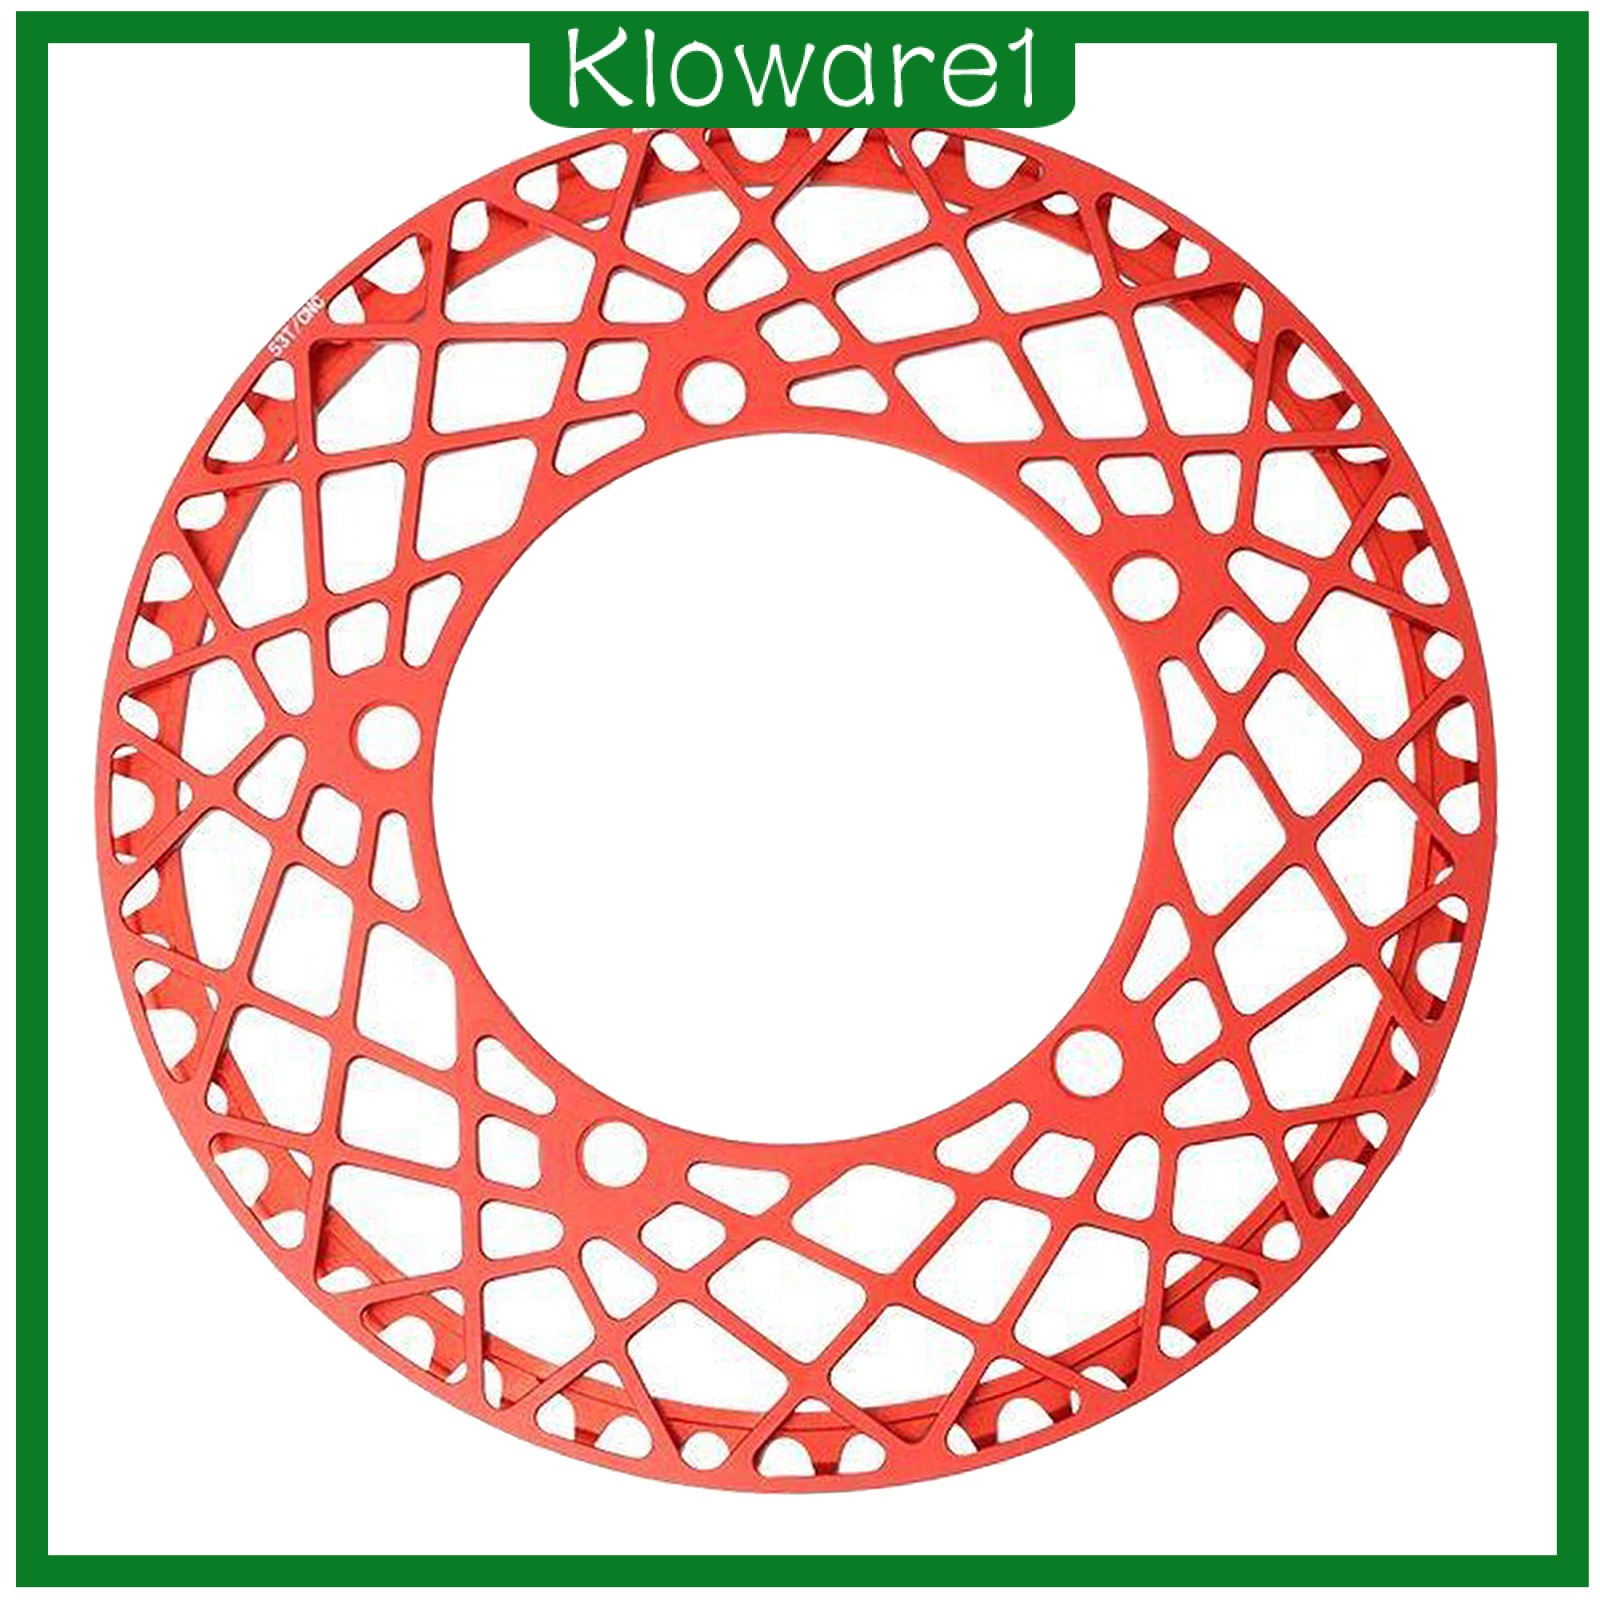 [KLOWARE1] Single Chainring 130 BCD Bike Chain Ring Narrow Wide 9 10 11 Speed for Folding